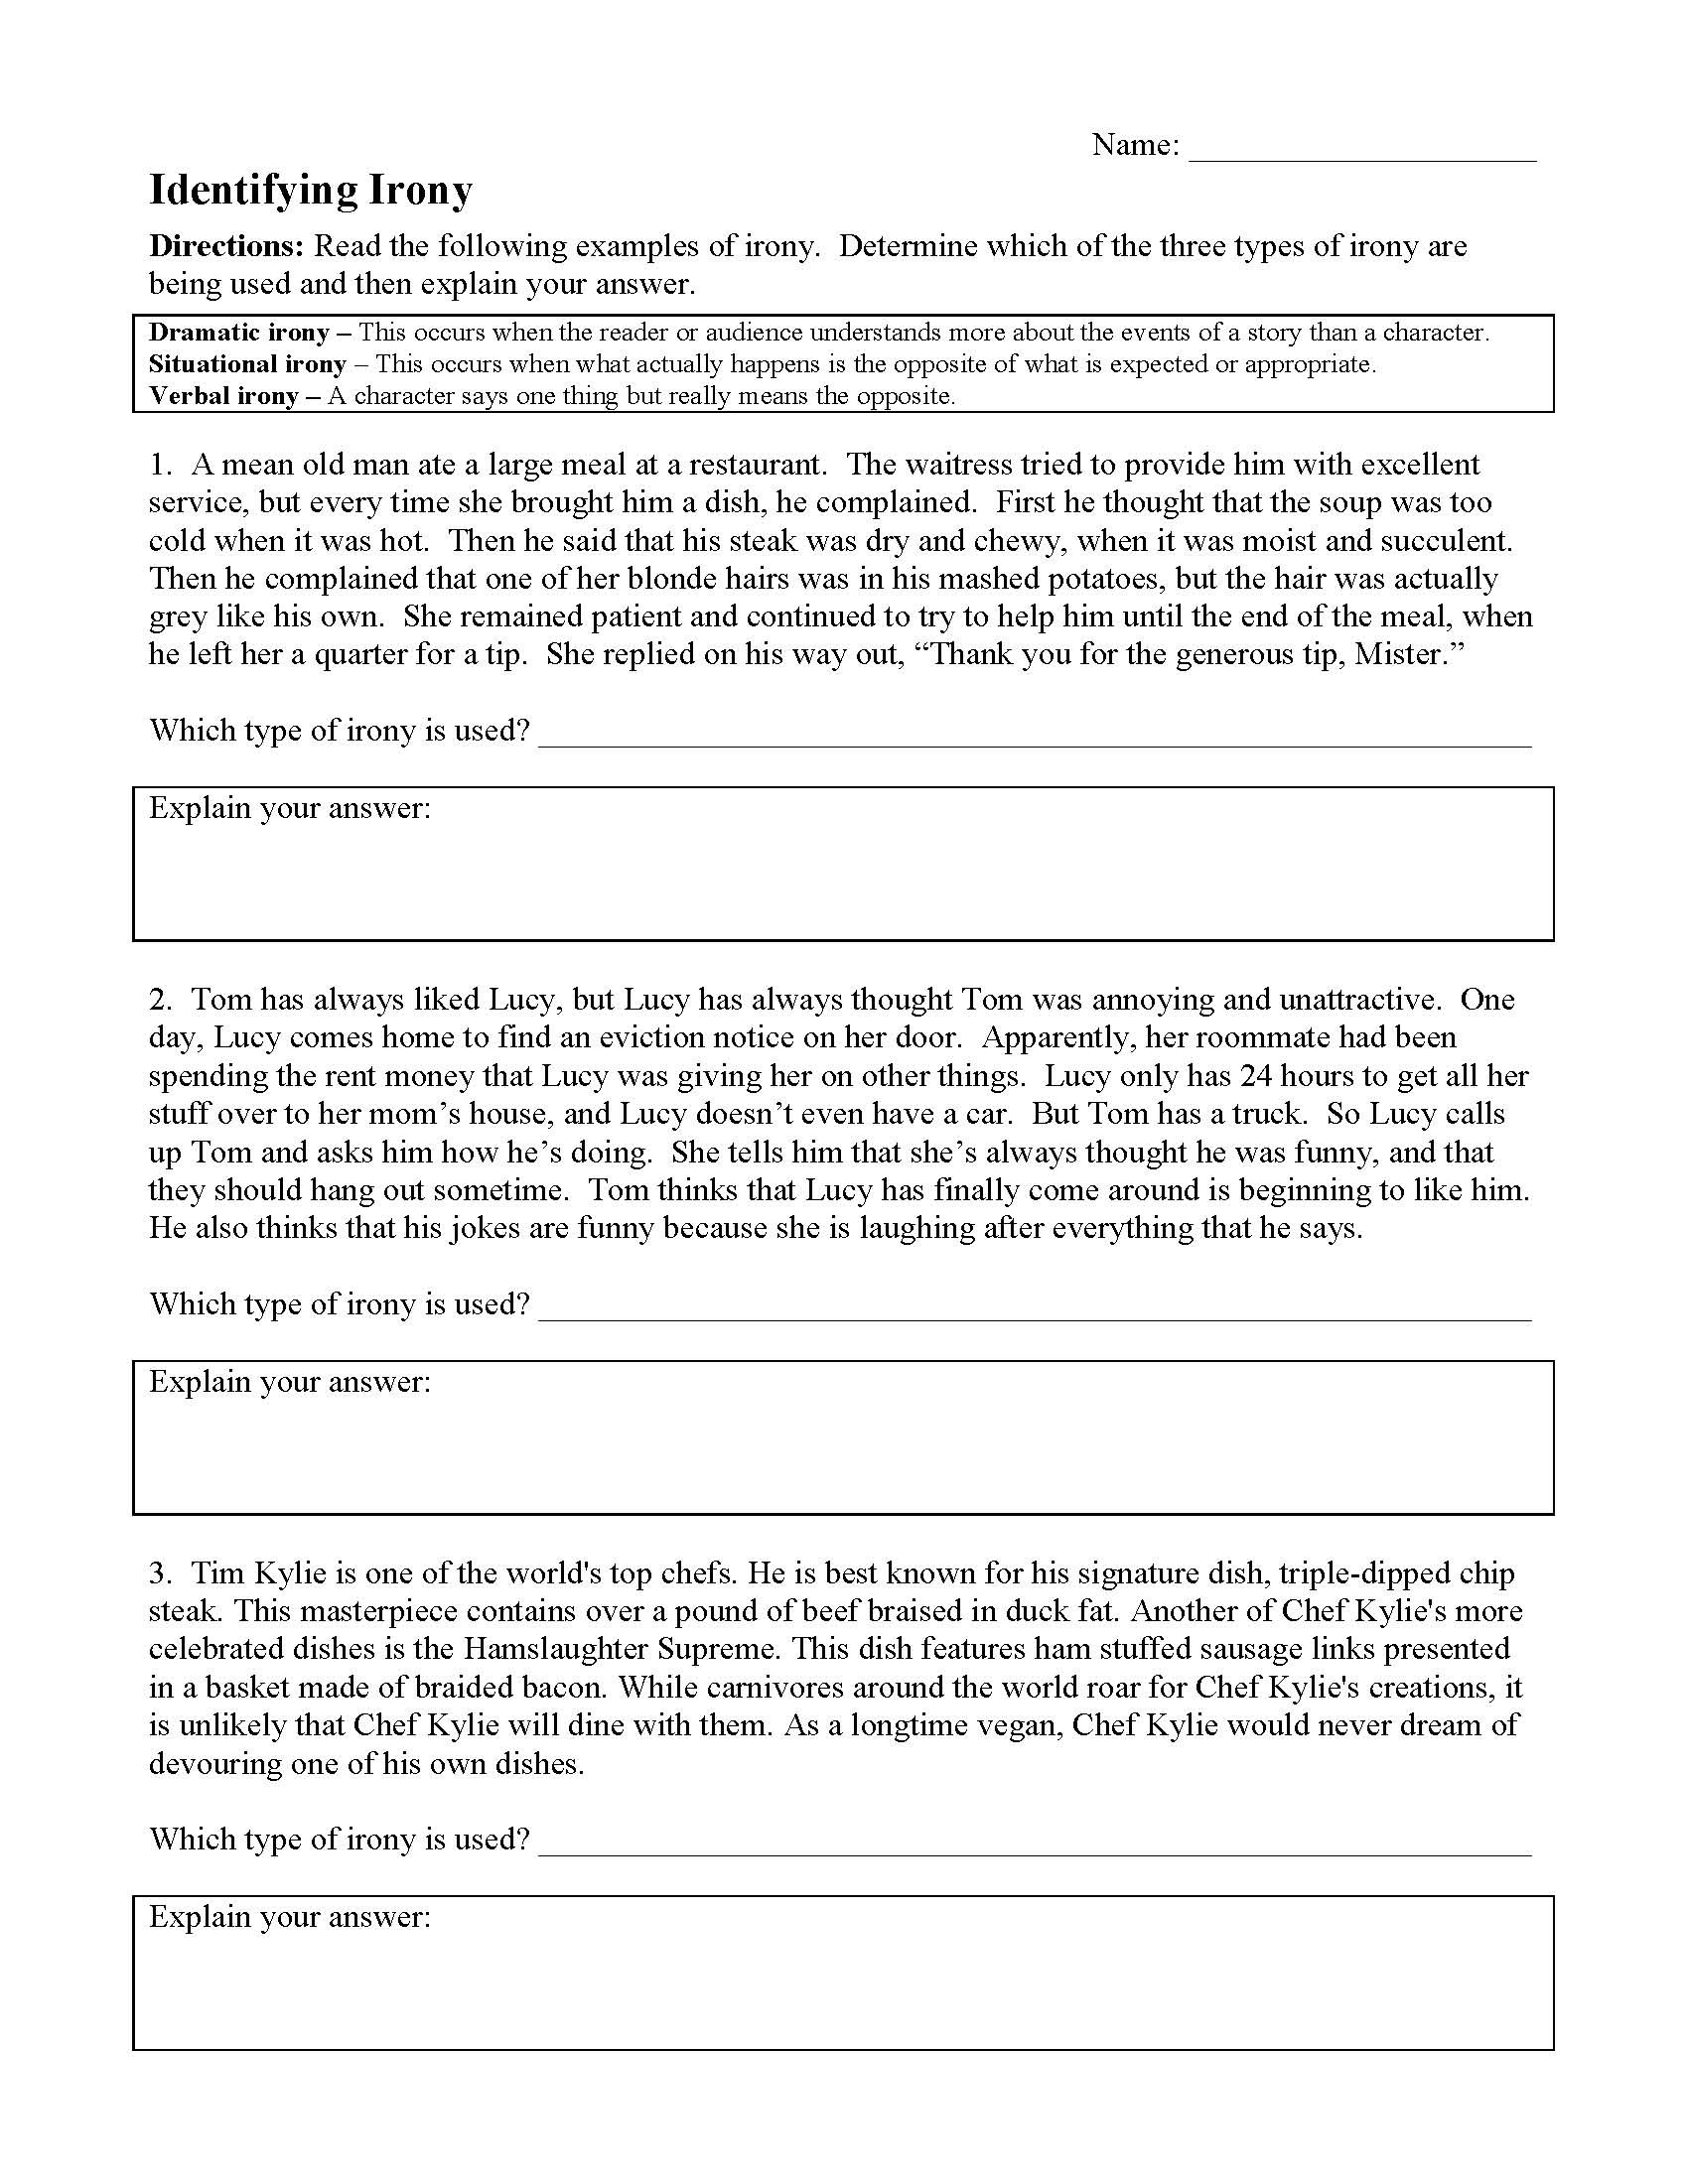 This is a preview image of Irony Worksheet 1. Click on it to enlarge it or view the source file.